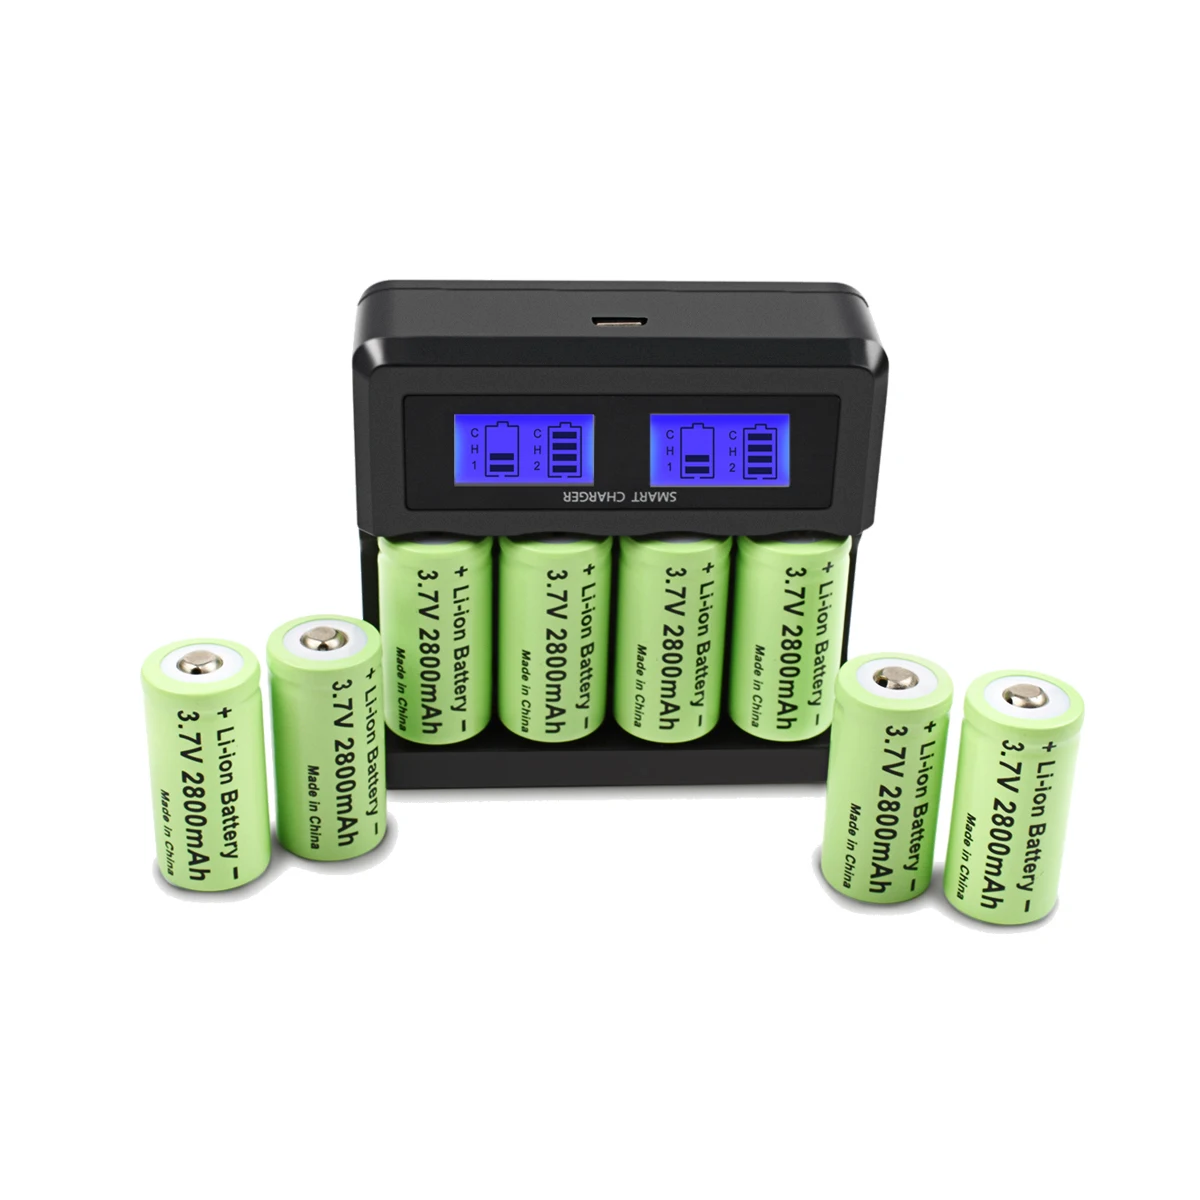 Powtree CR123A RCR 123 ICR 16340 Battery 2800mAh 3.7V Li-ion Rechargeable Battery For Arlo Security Camera L70